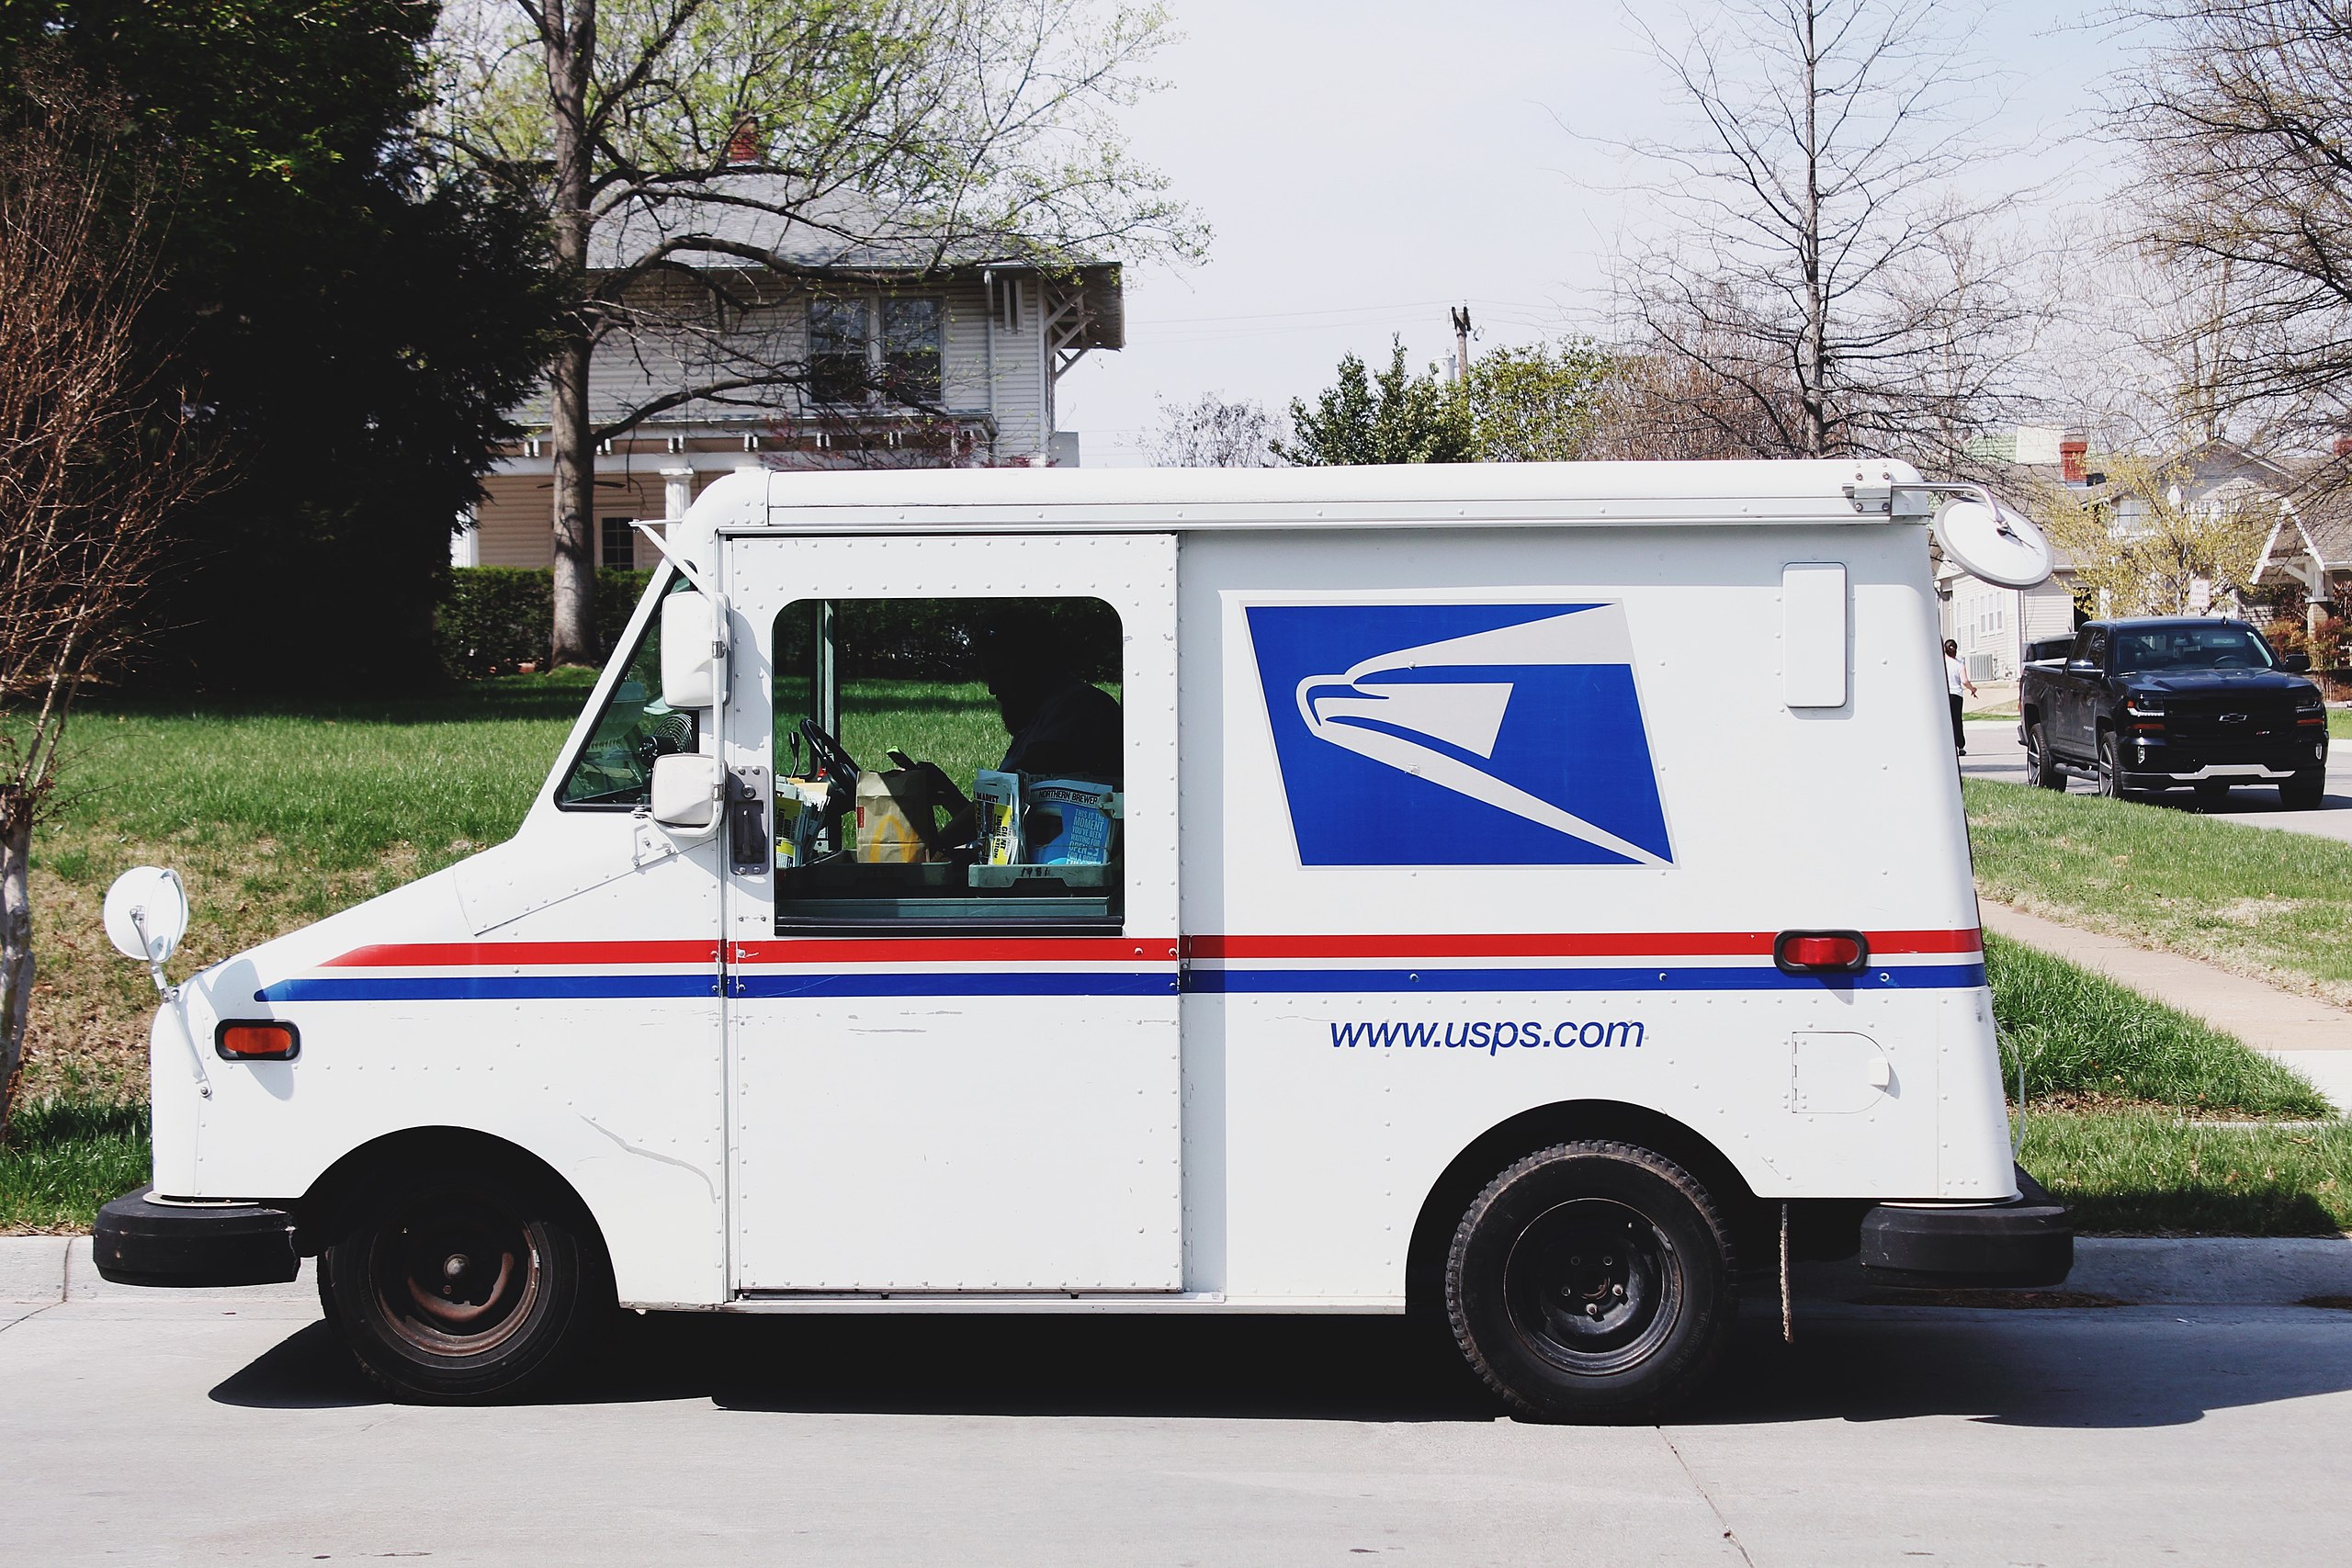 A USPS mail truck sits in a neighborhood setting.